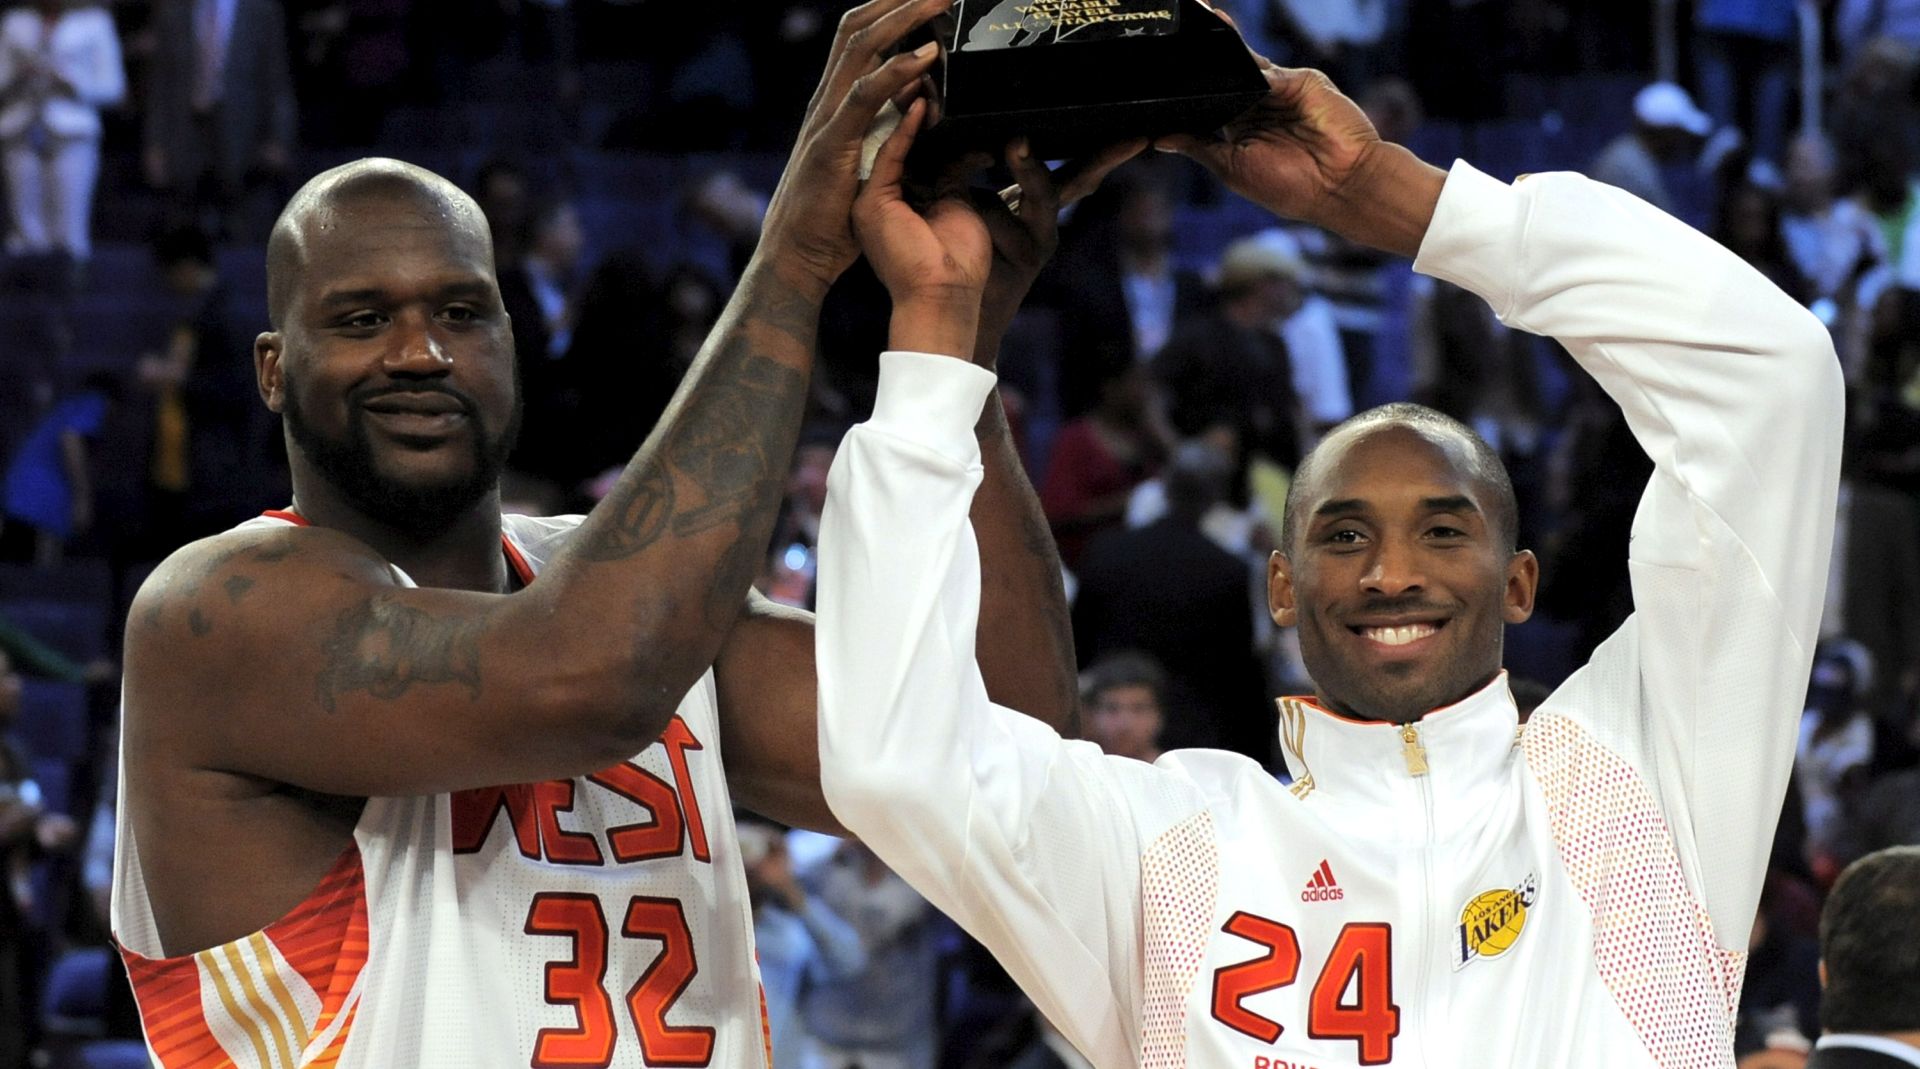 epa08168033 (FILE) Most valuable players Kobe Bryant (R) and Shaquille O'Neal (L) from the West team hold up the trophy at the NBA All-Star game at the U.S. Airways Center in Phoenix, Arizona, USA, 15 February 2009 (reissued 26 January 2020). According to media reports former US basketball player Kobe Bryant has died in a helicopter crash in Calabasas, California, USA on 26 January 2020. He was 41.  EPA/JOHN G. MABANGLO SHUTTERSTOCK OUT